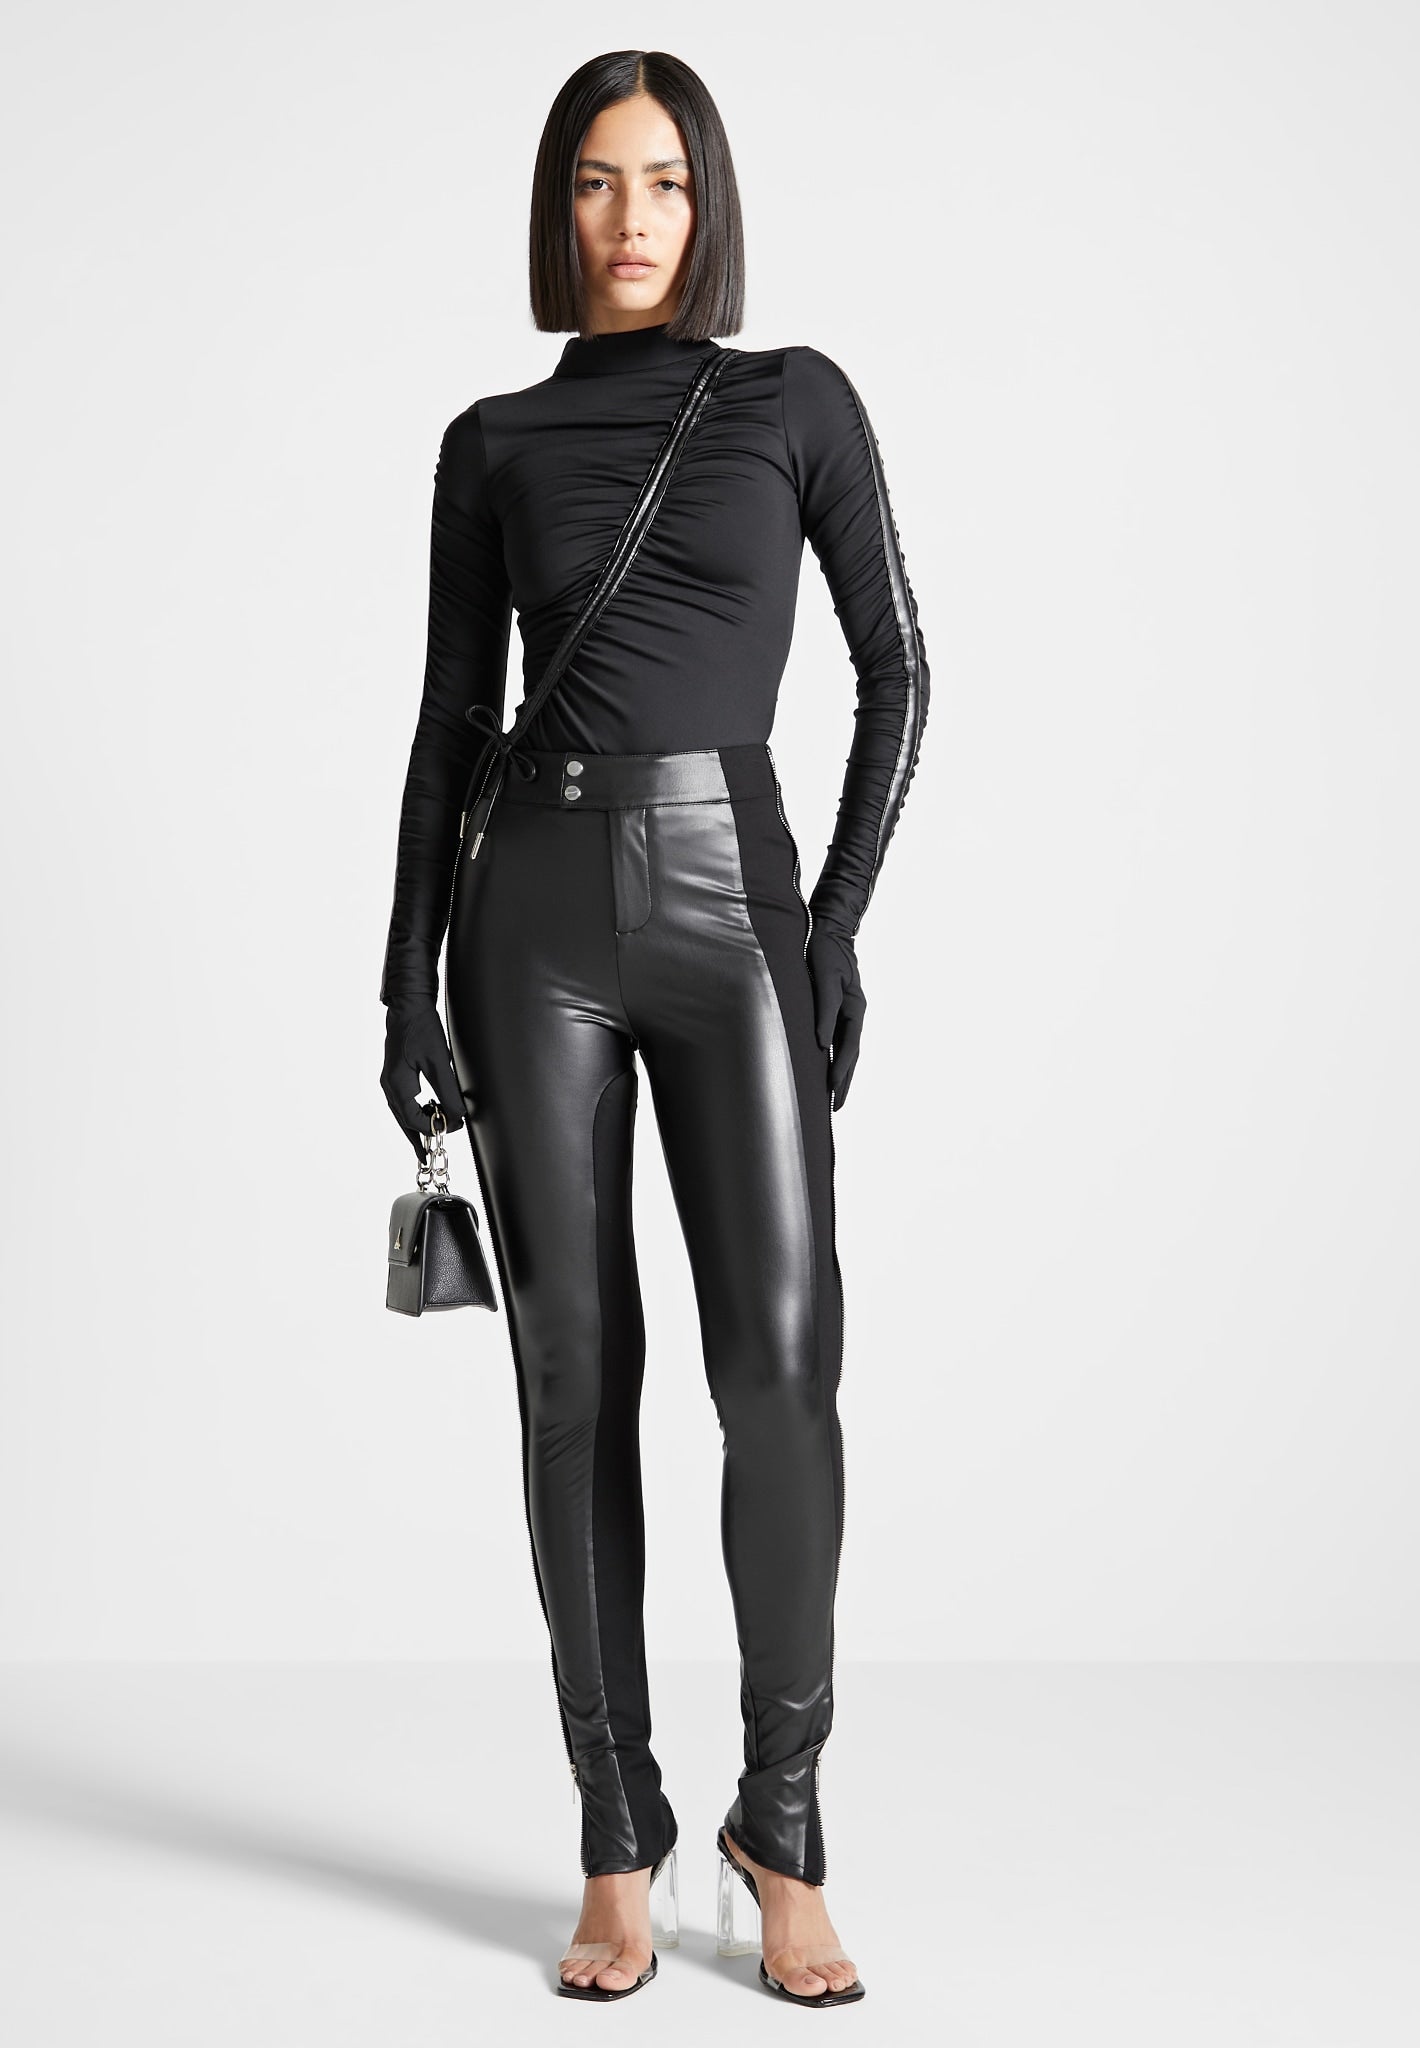 West Broadway Seek Black Leggings Ladies Leather Pants Made By West14th.  Made From 100% Genuine Soft Lamb Leather. For all seasons, Quality To Last  A Lifetime. – West 14th